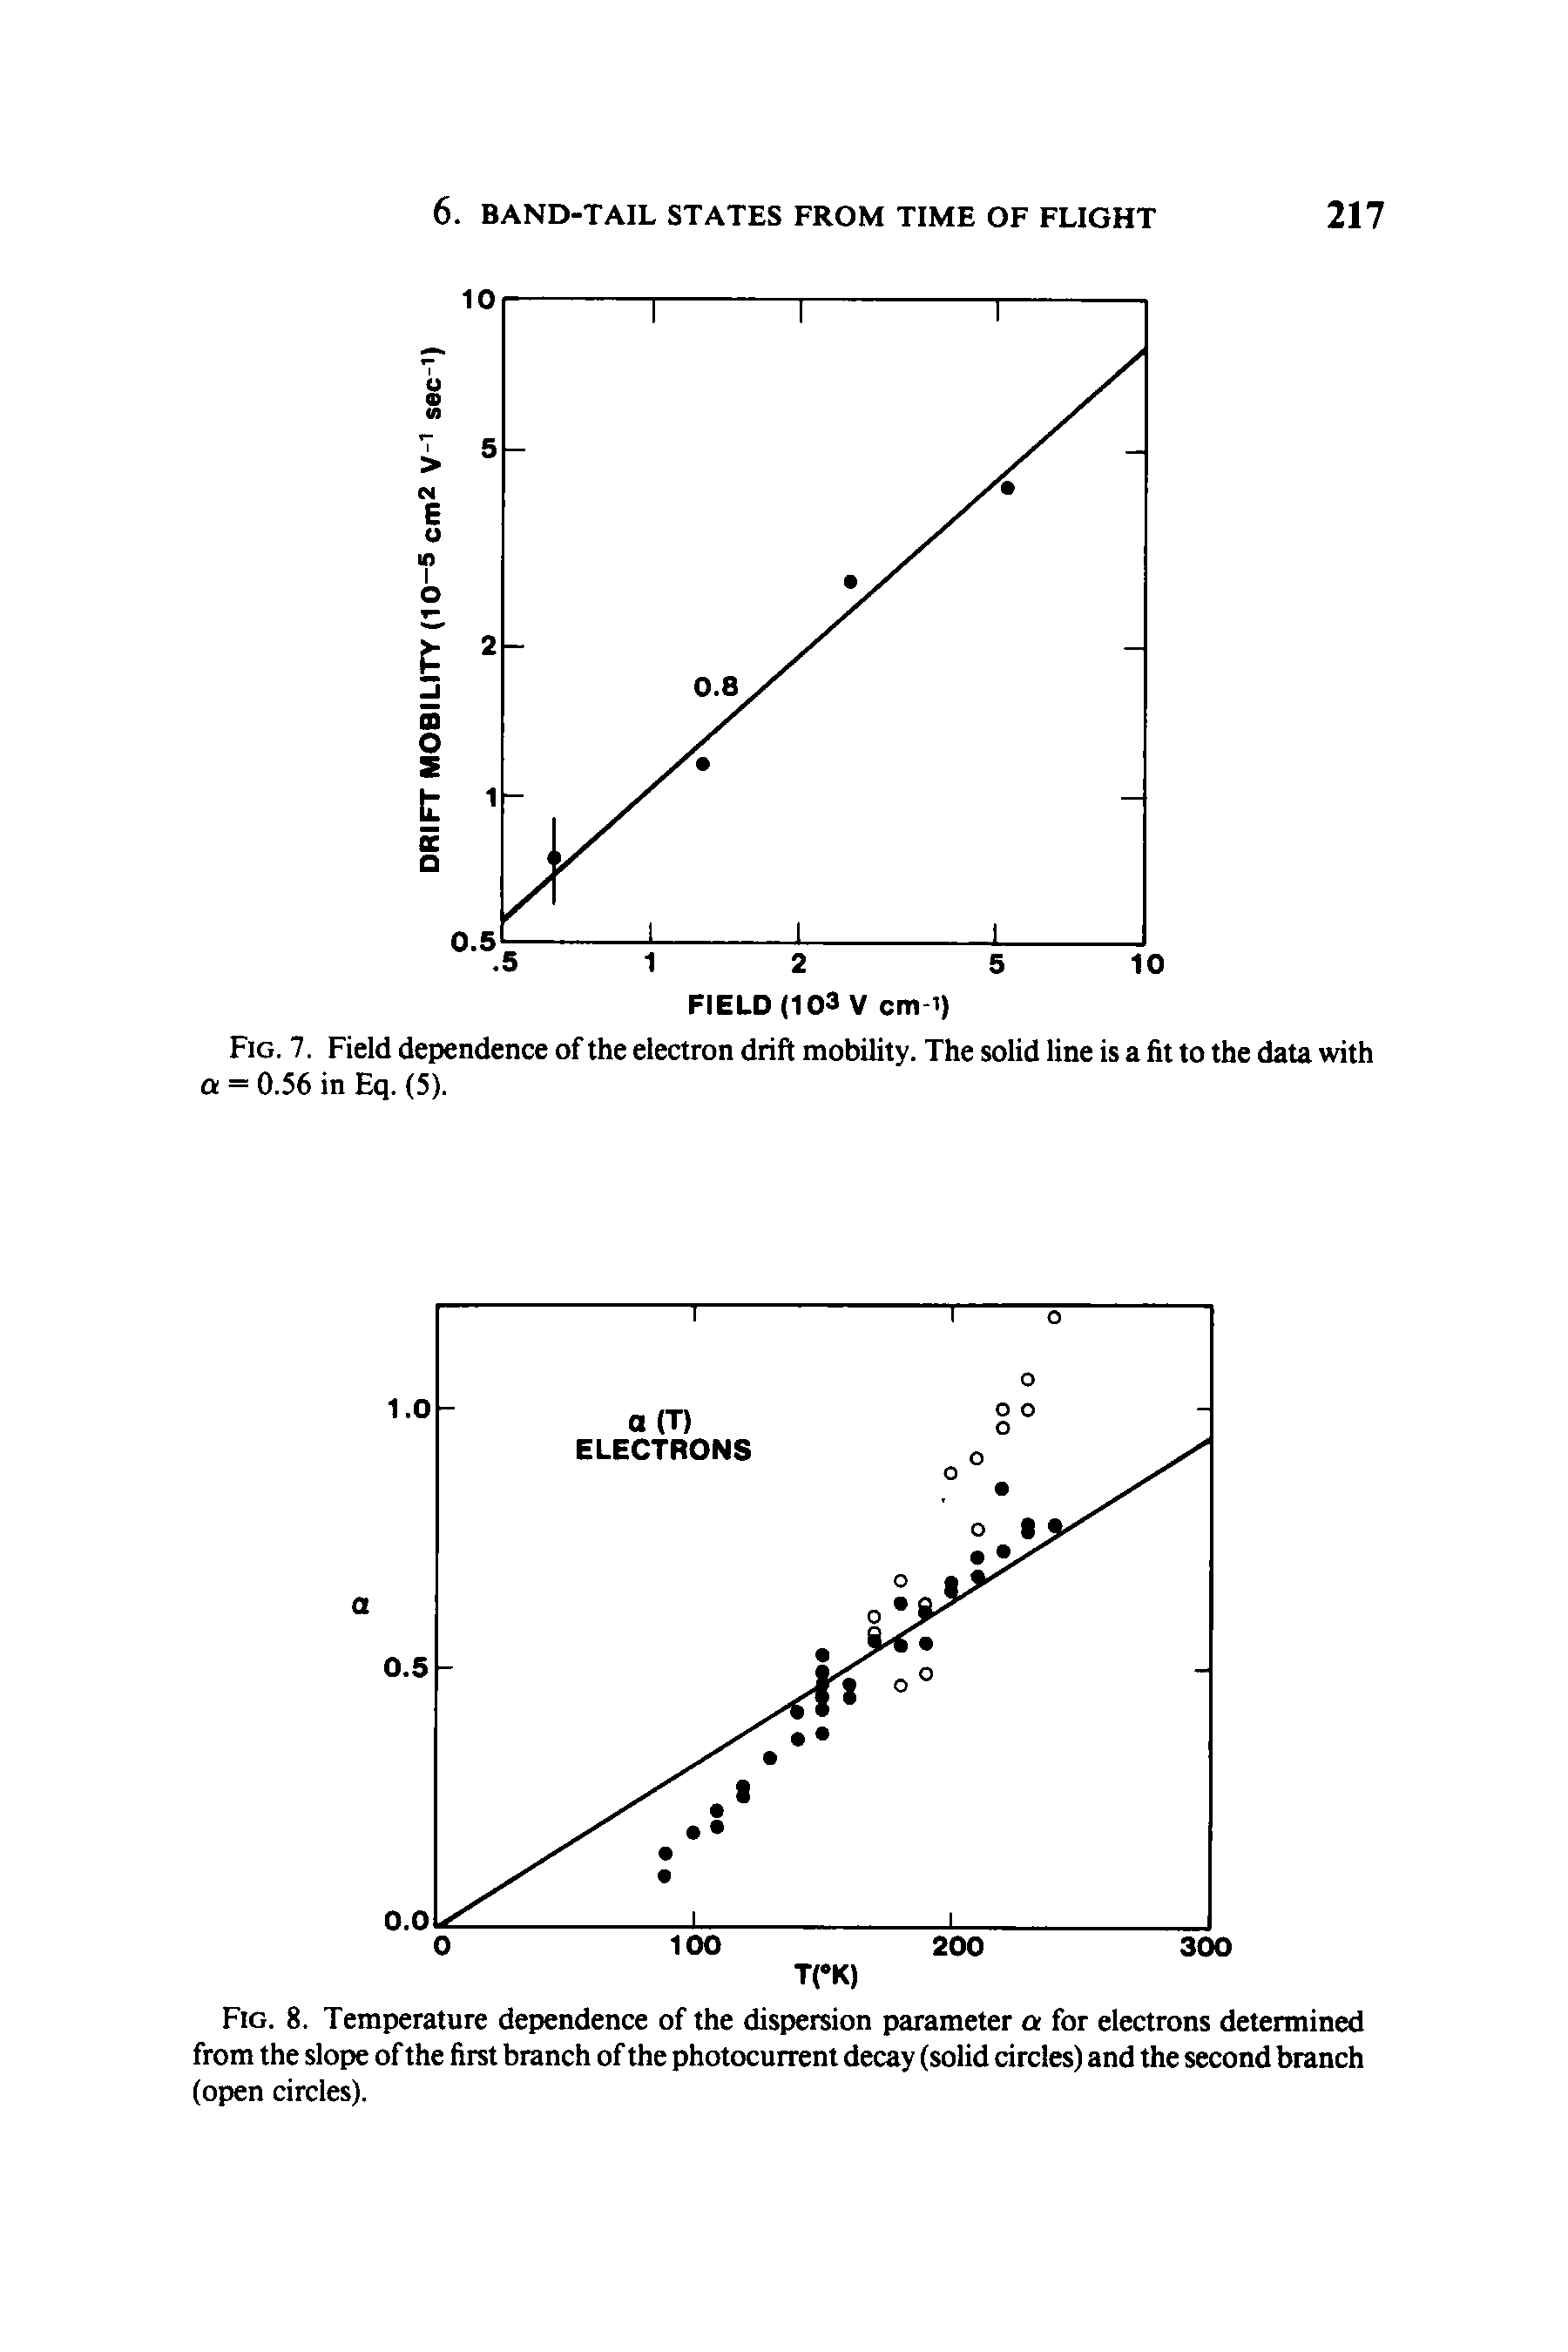 Fig. 7. Field dependence of the electron drift mobility. The solid line is a fit to the data with a = 0.56 in Eq. (5).